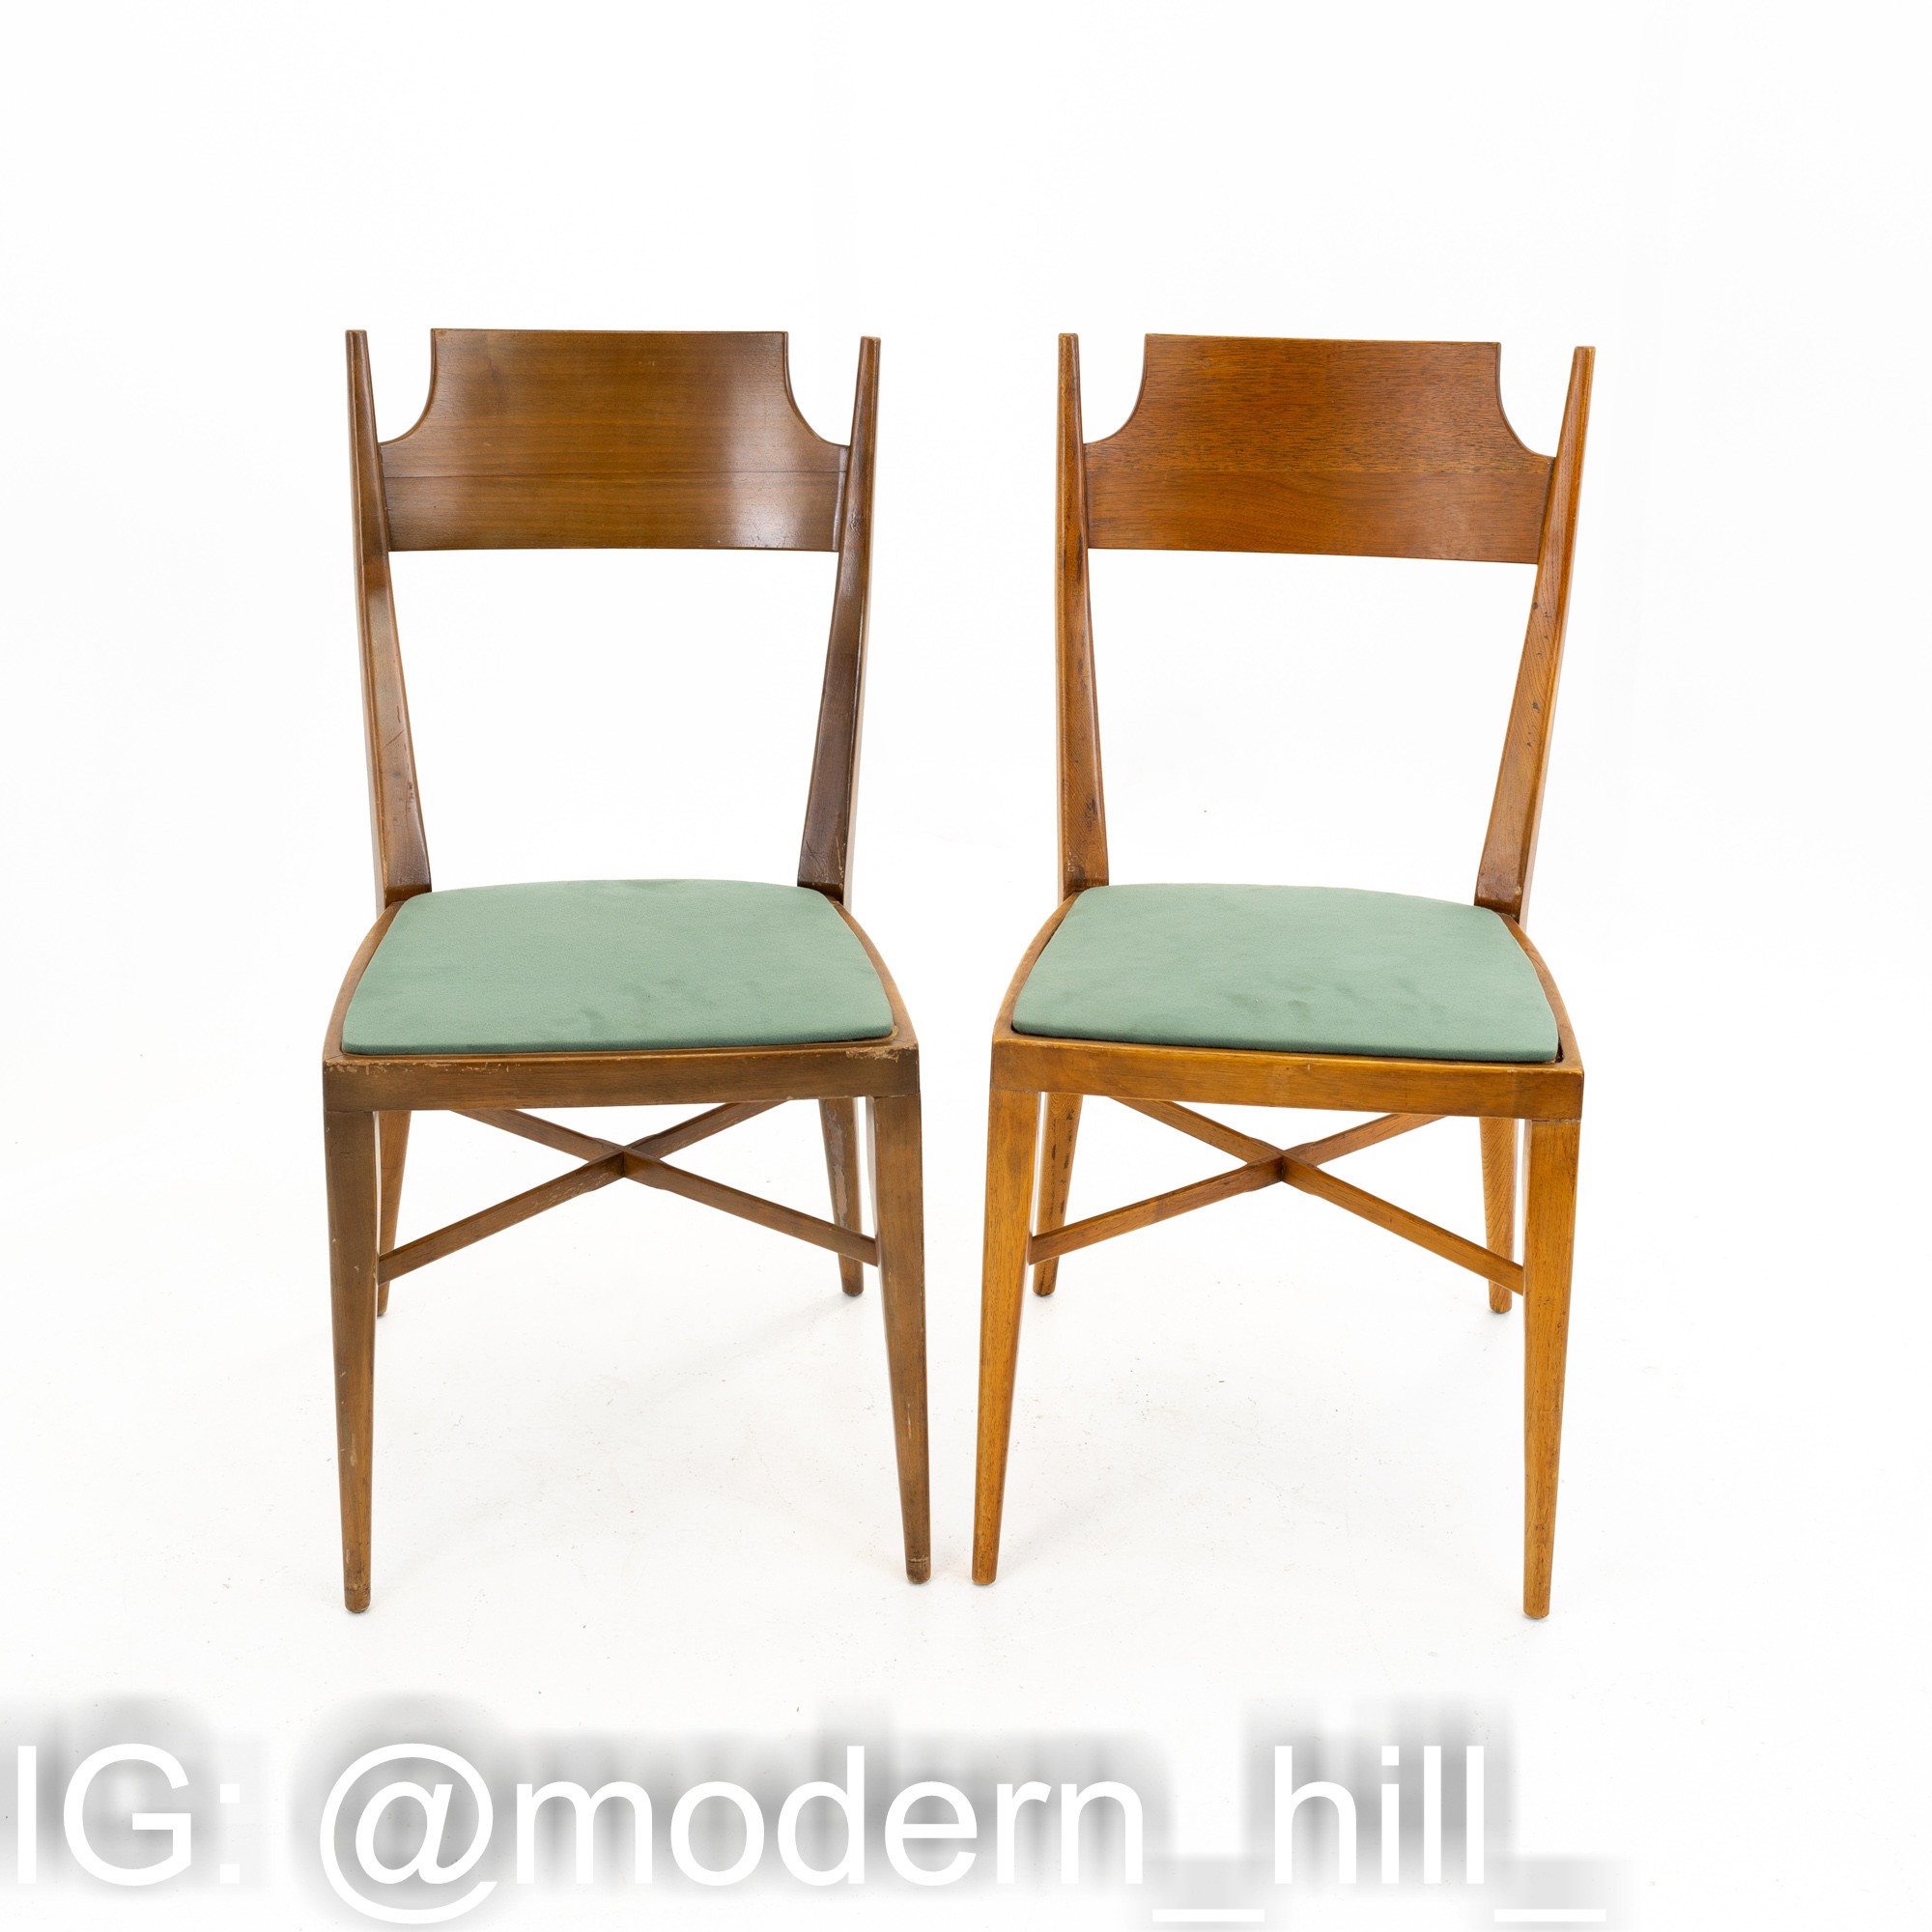 Paul Mccobb Mid Century Connoisseur Dining Chairs - Set of 4